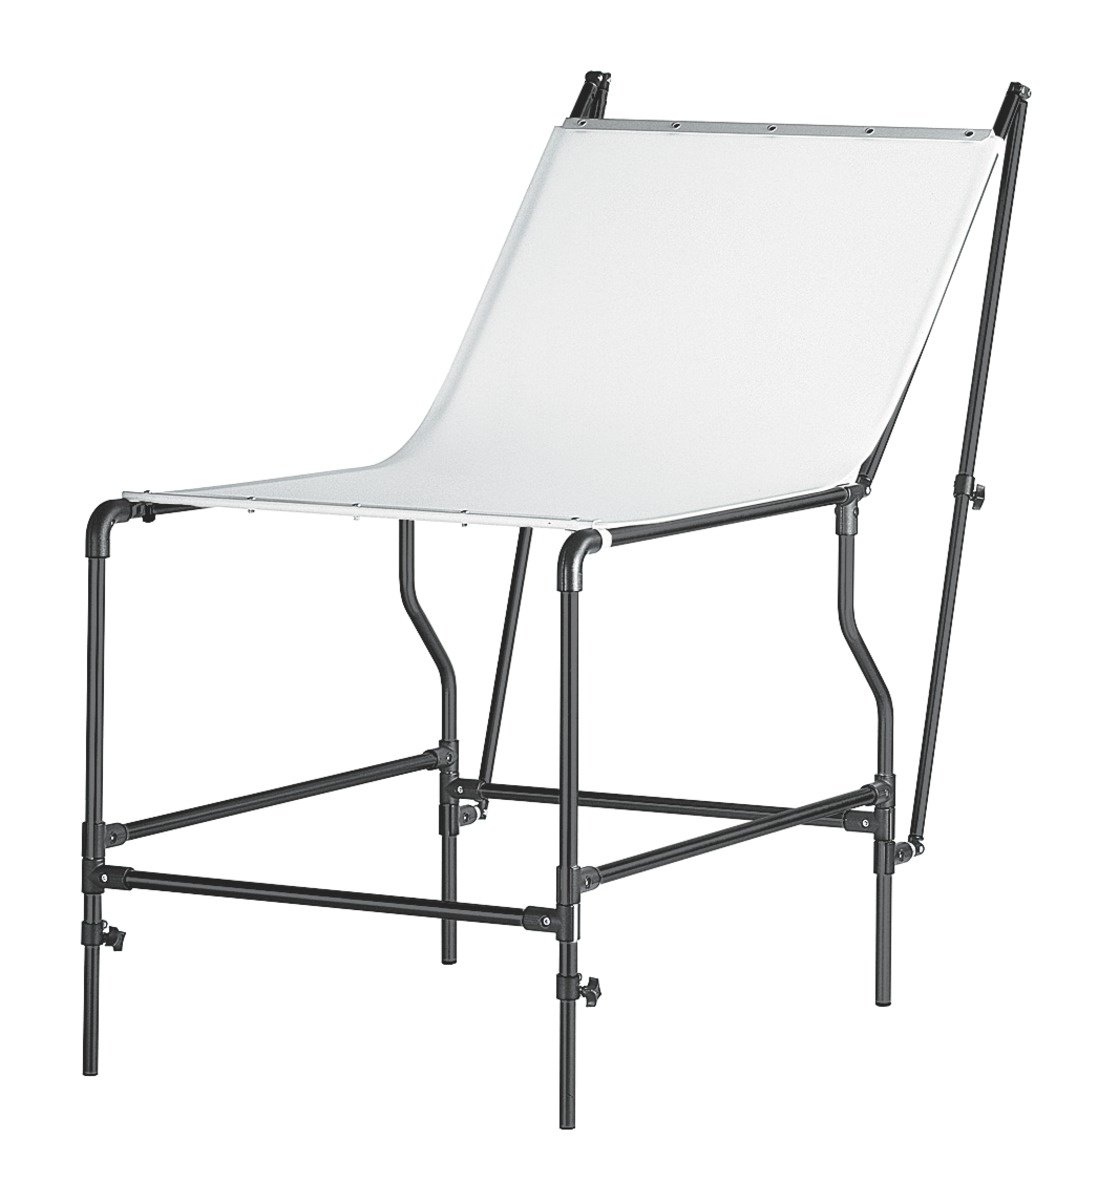 Manfrotto 320 Mini Still Life Shooting Table (Black Frame) with Plexiglass Panel